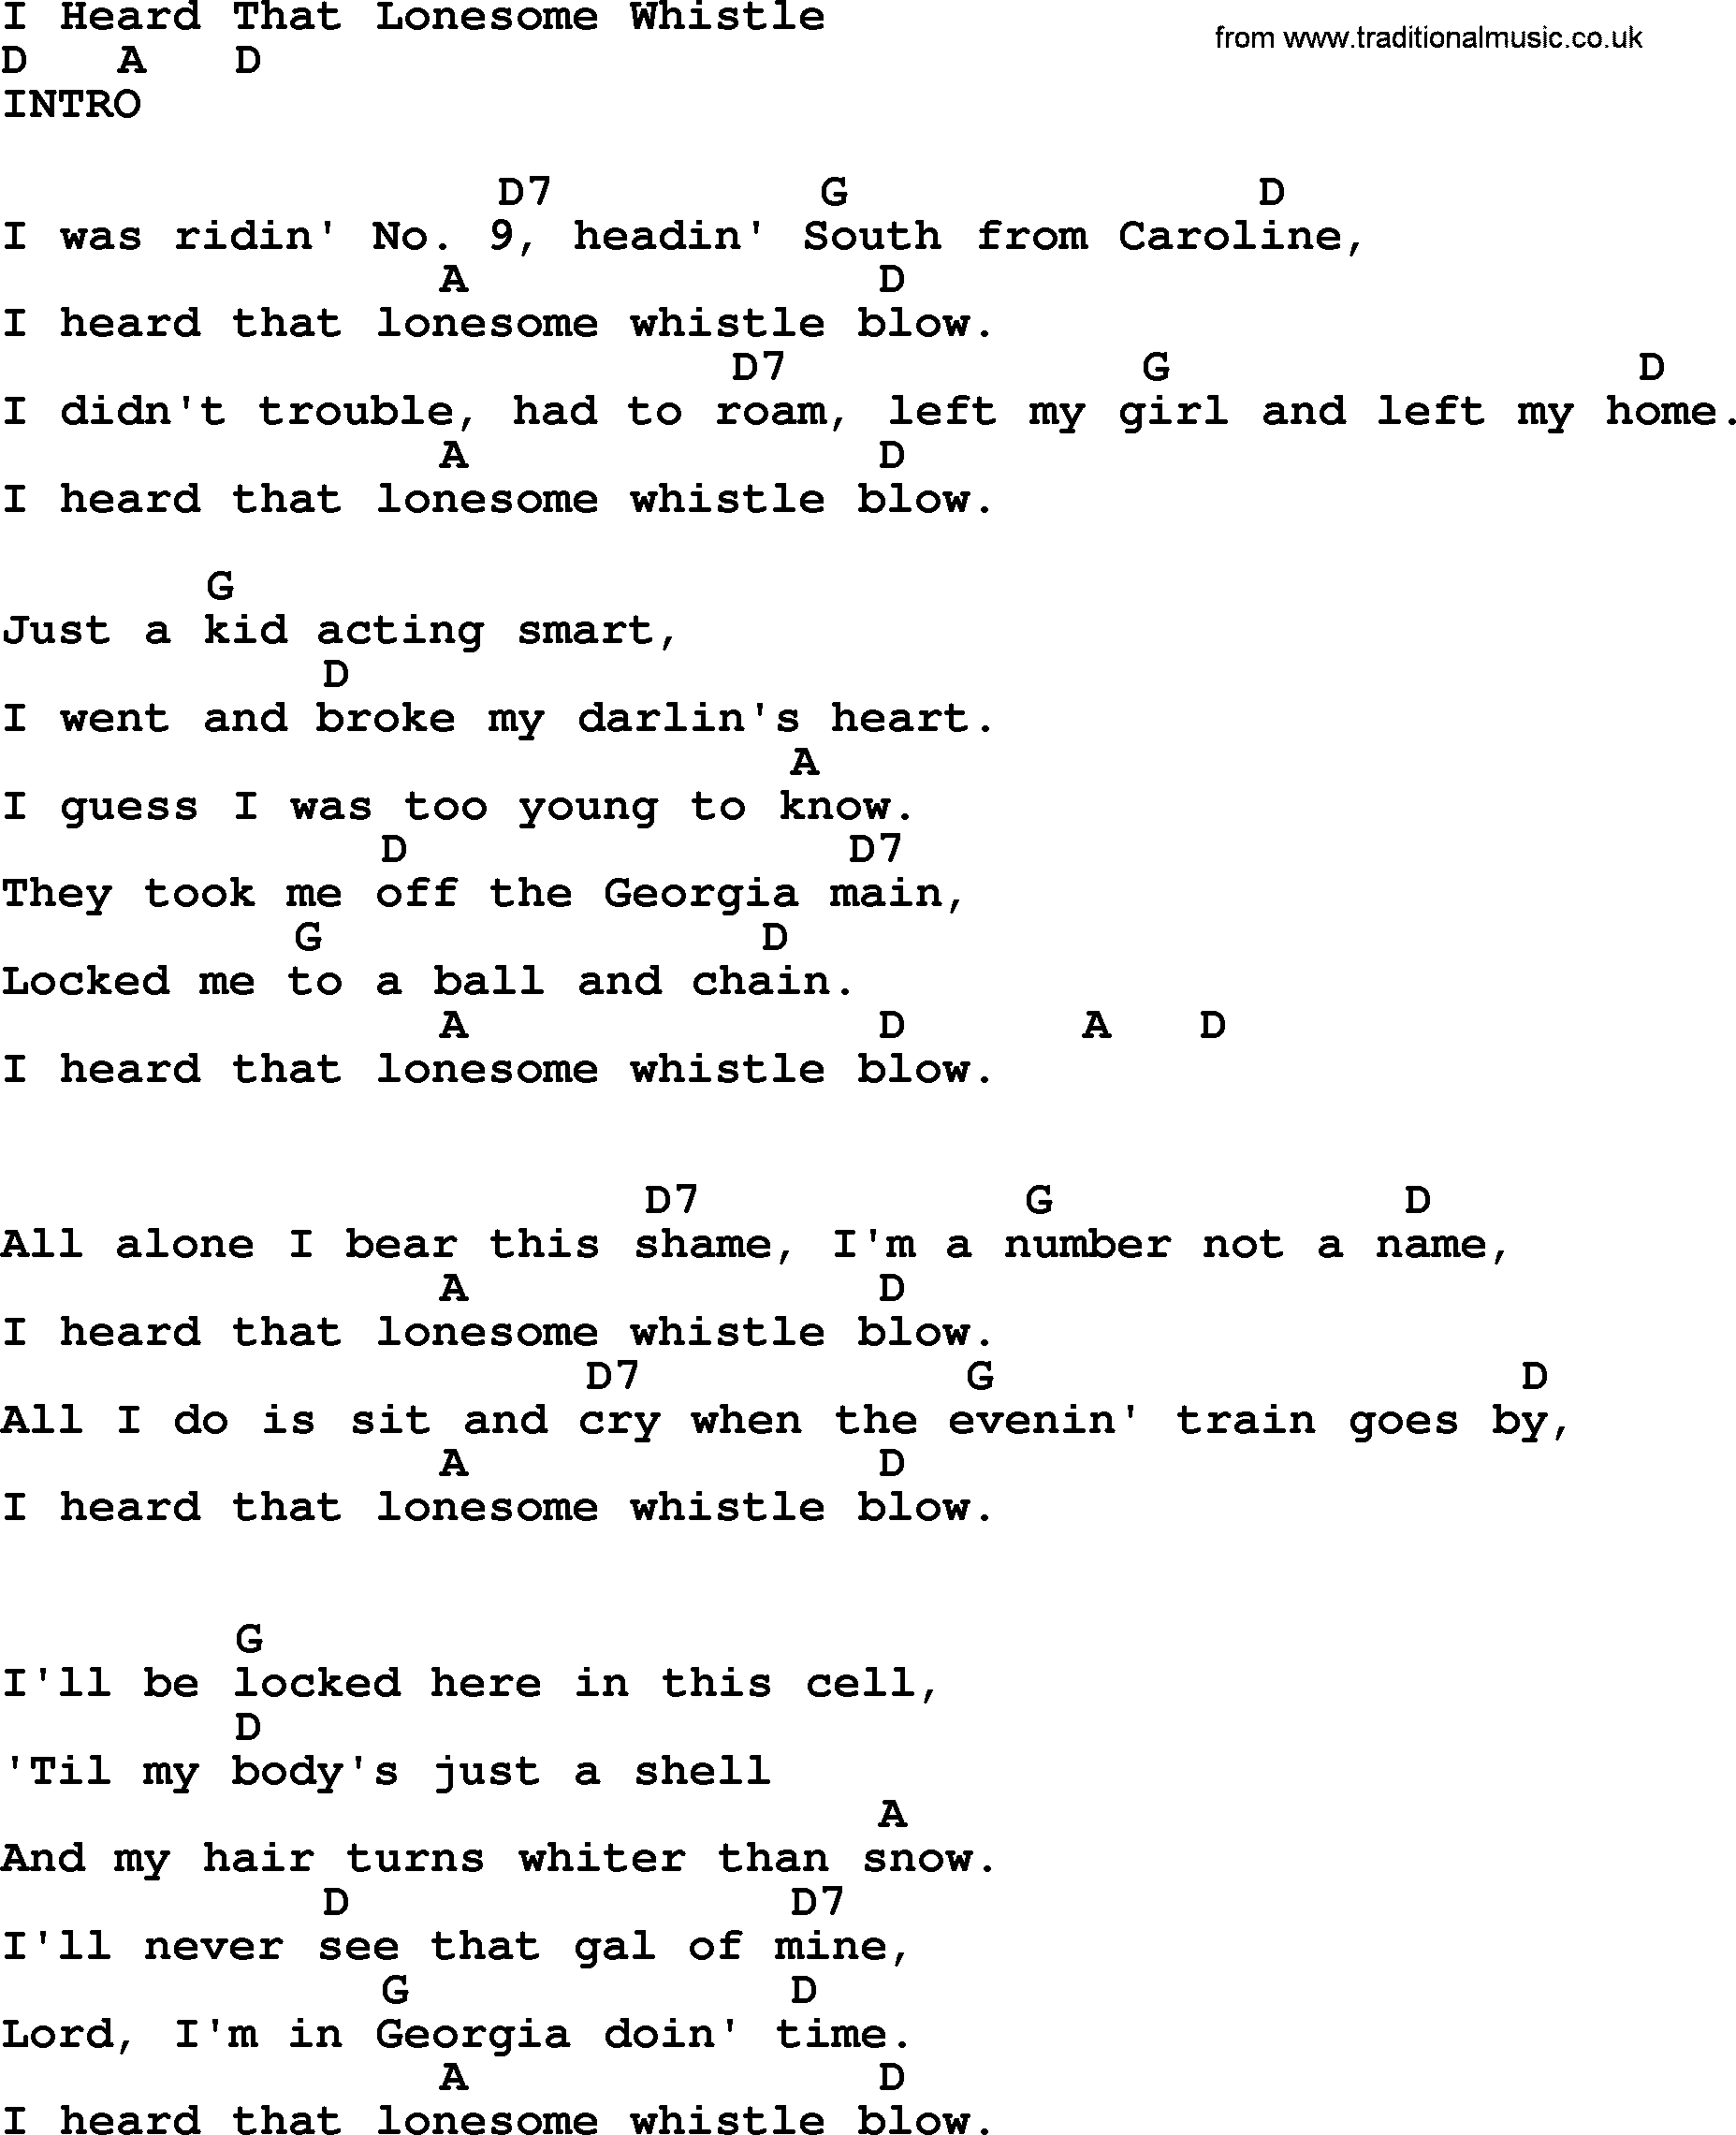 Hank Williams song I Heard That Lonesome Whistle, lyrics and chords